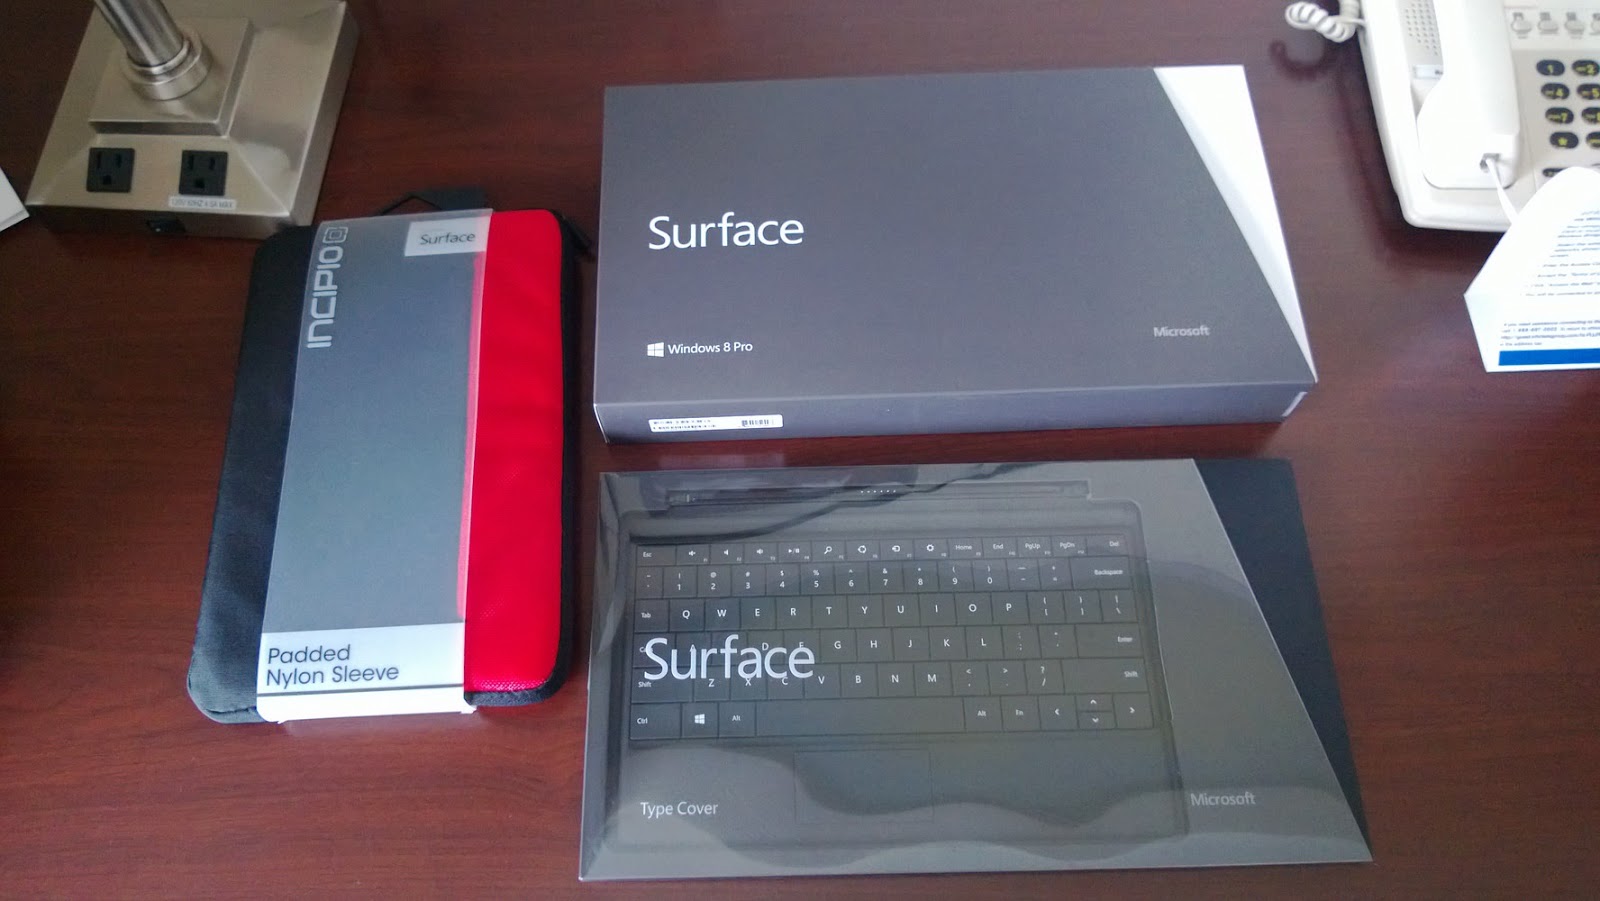 An update on my thoughts on the Surface Pro after two months of use